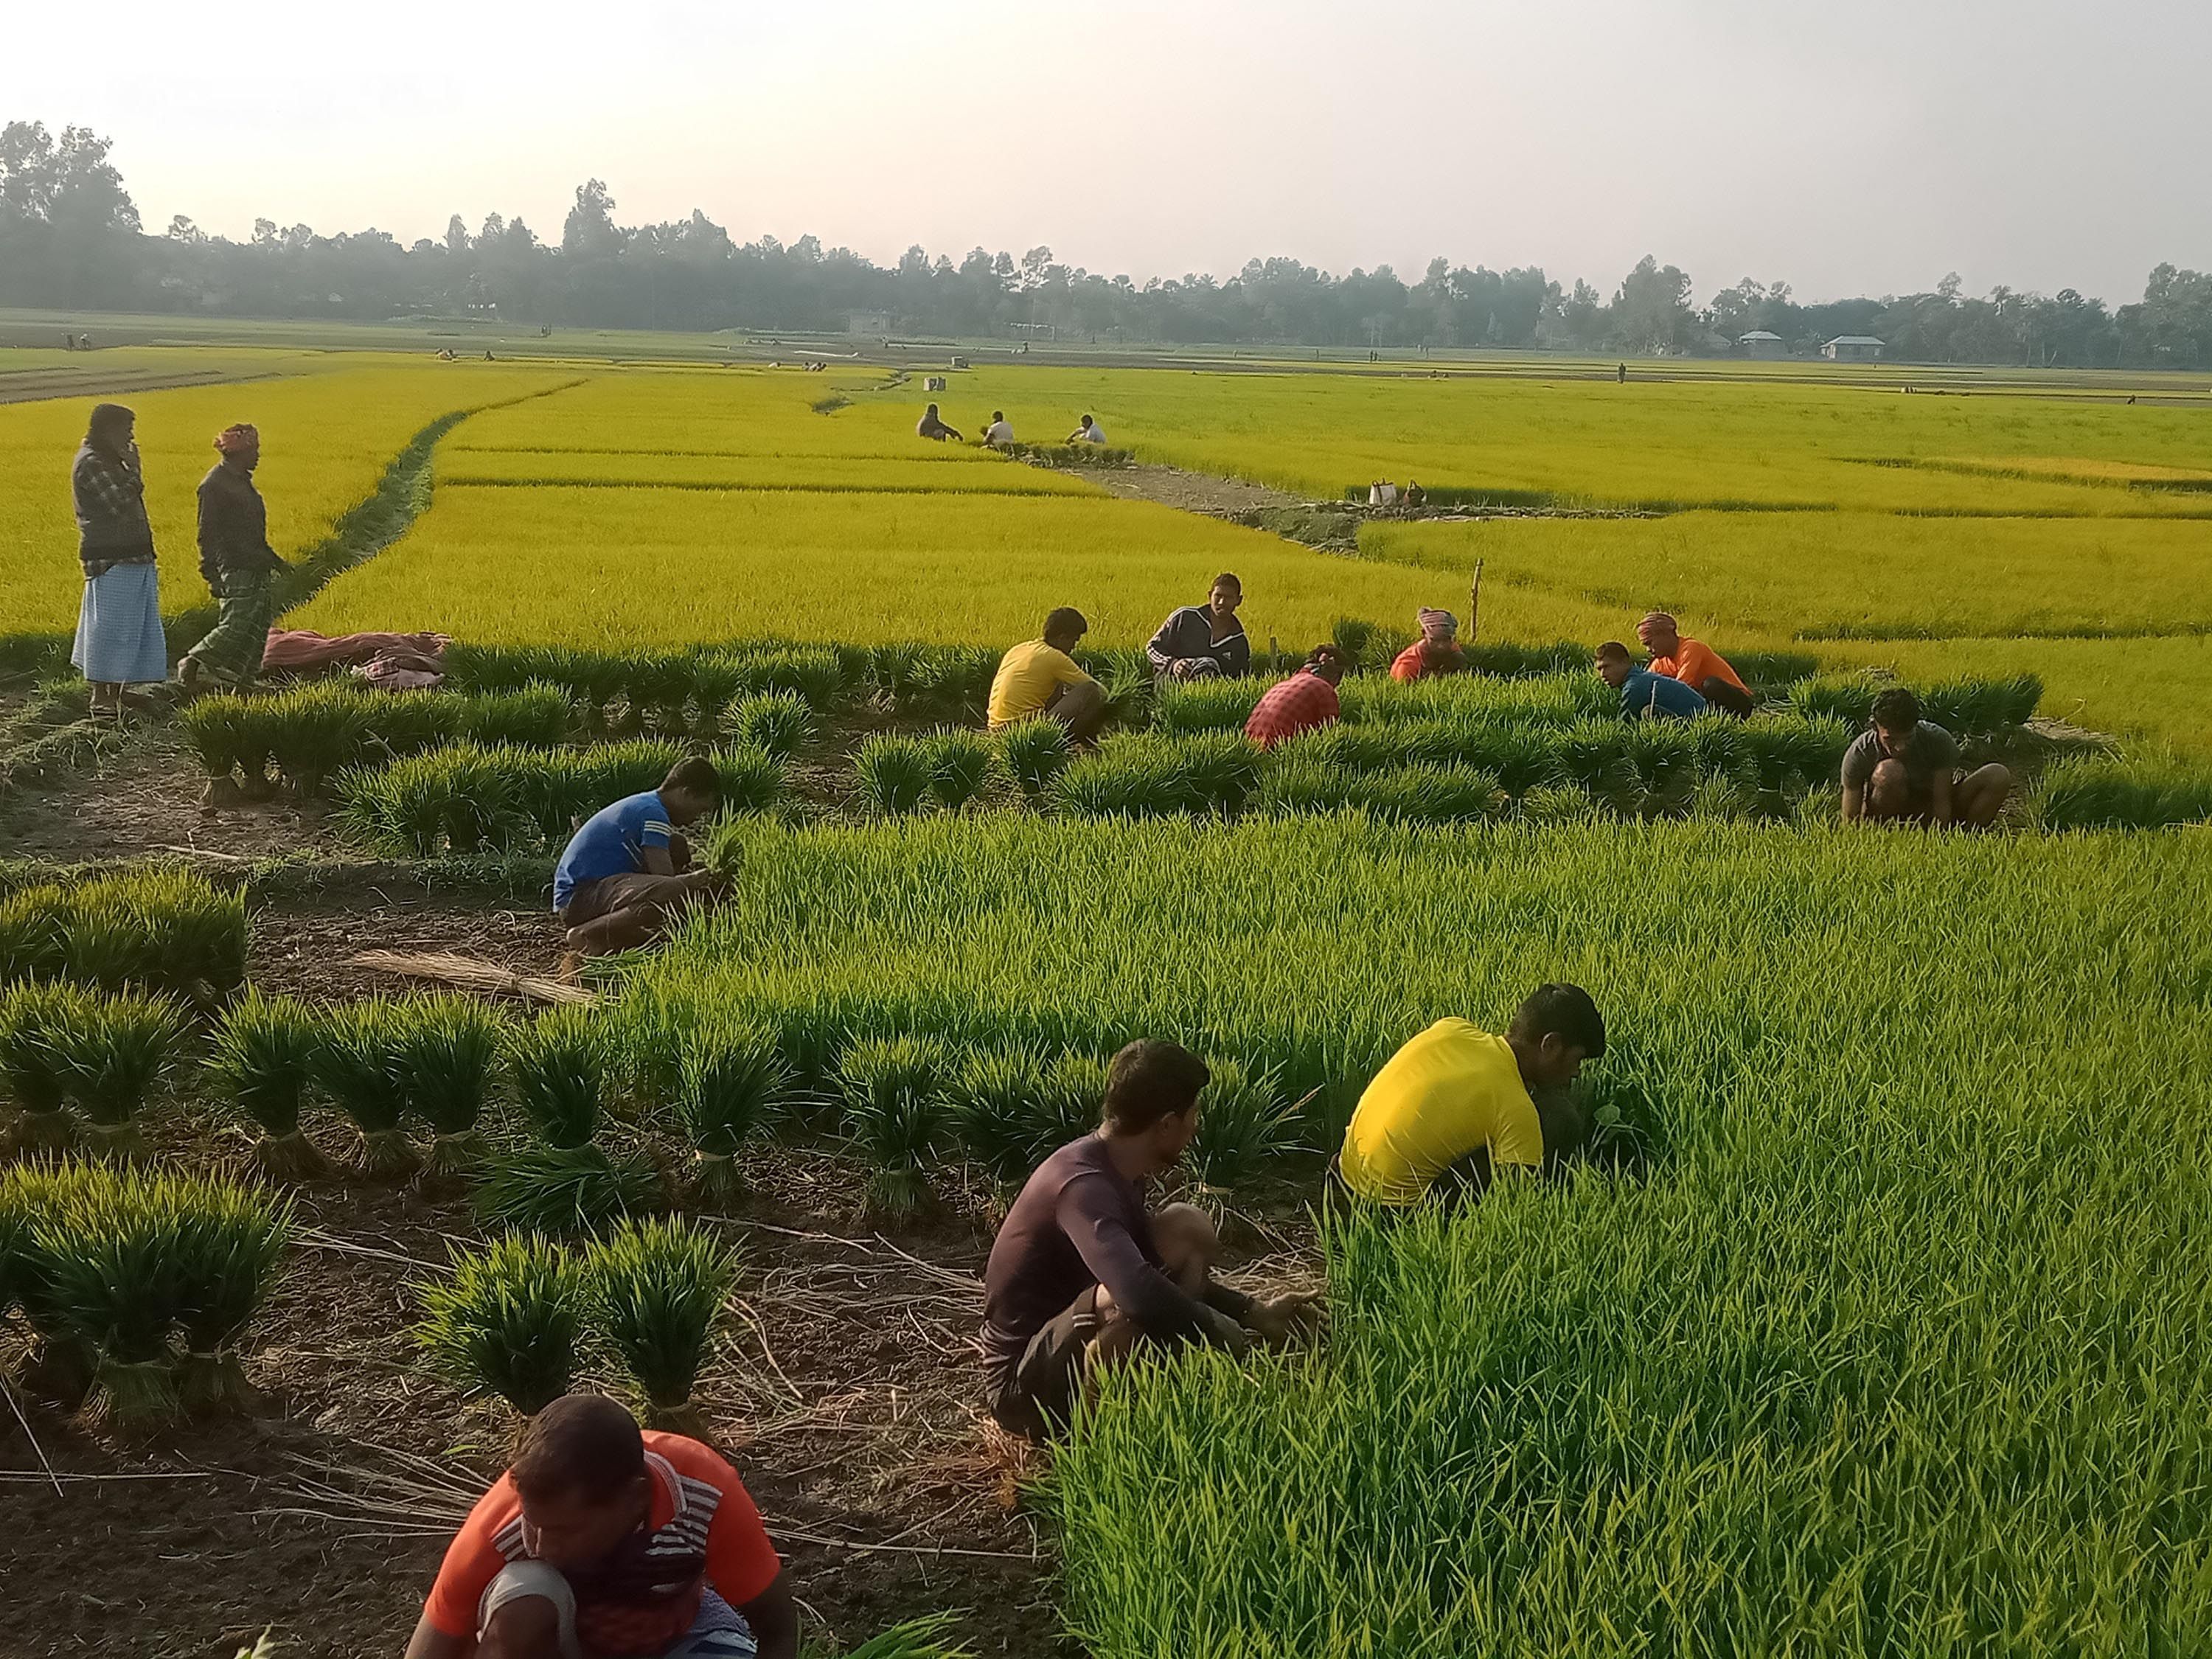 Farmers are busy picking seedlings for planting IRRI-Boro paddy. Picture taken from Patul area of Naldanga upazila of Natore.